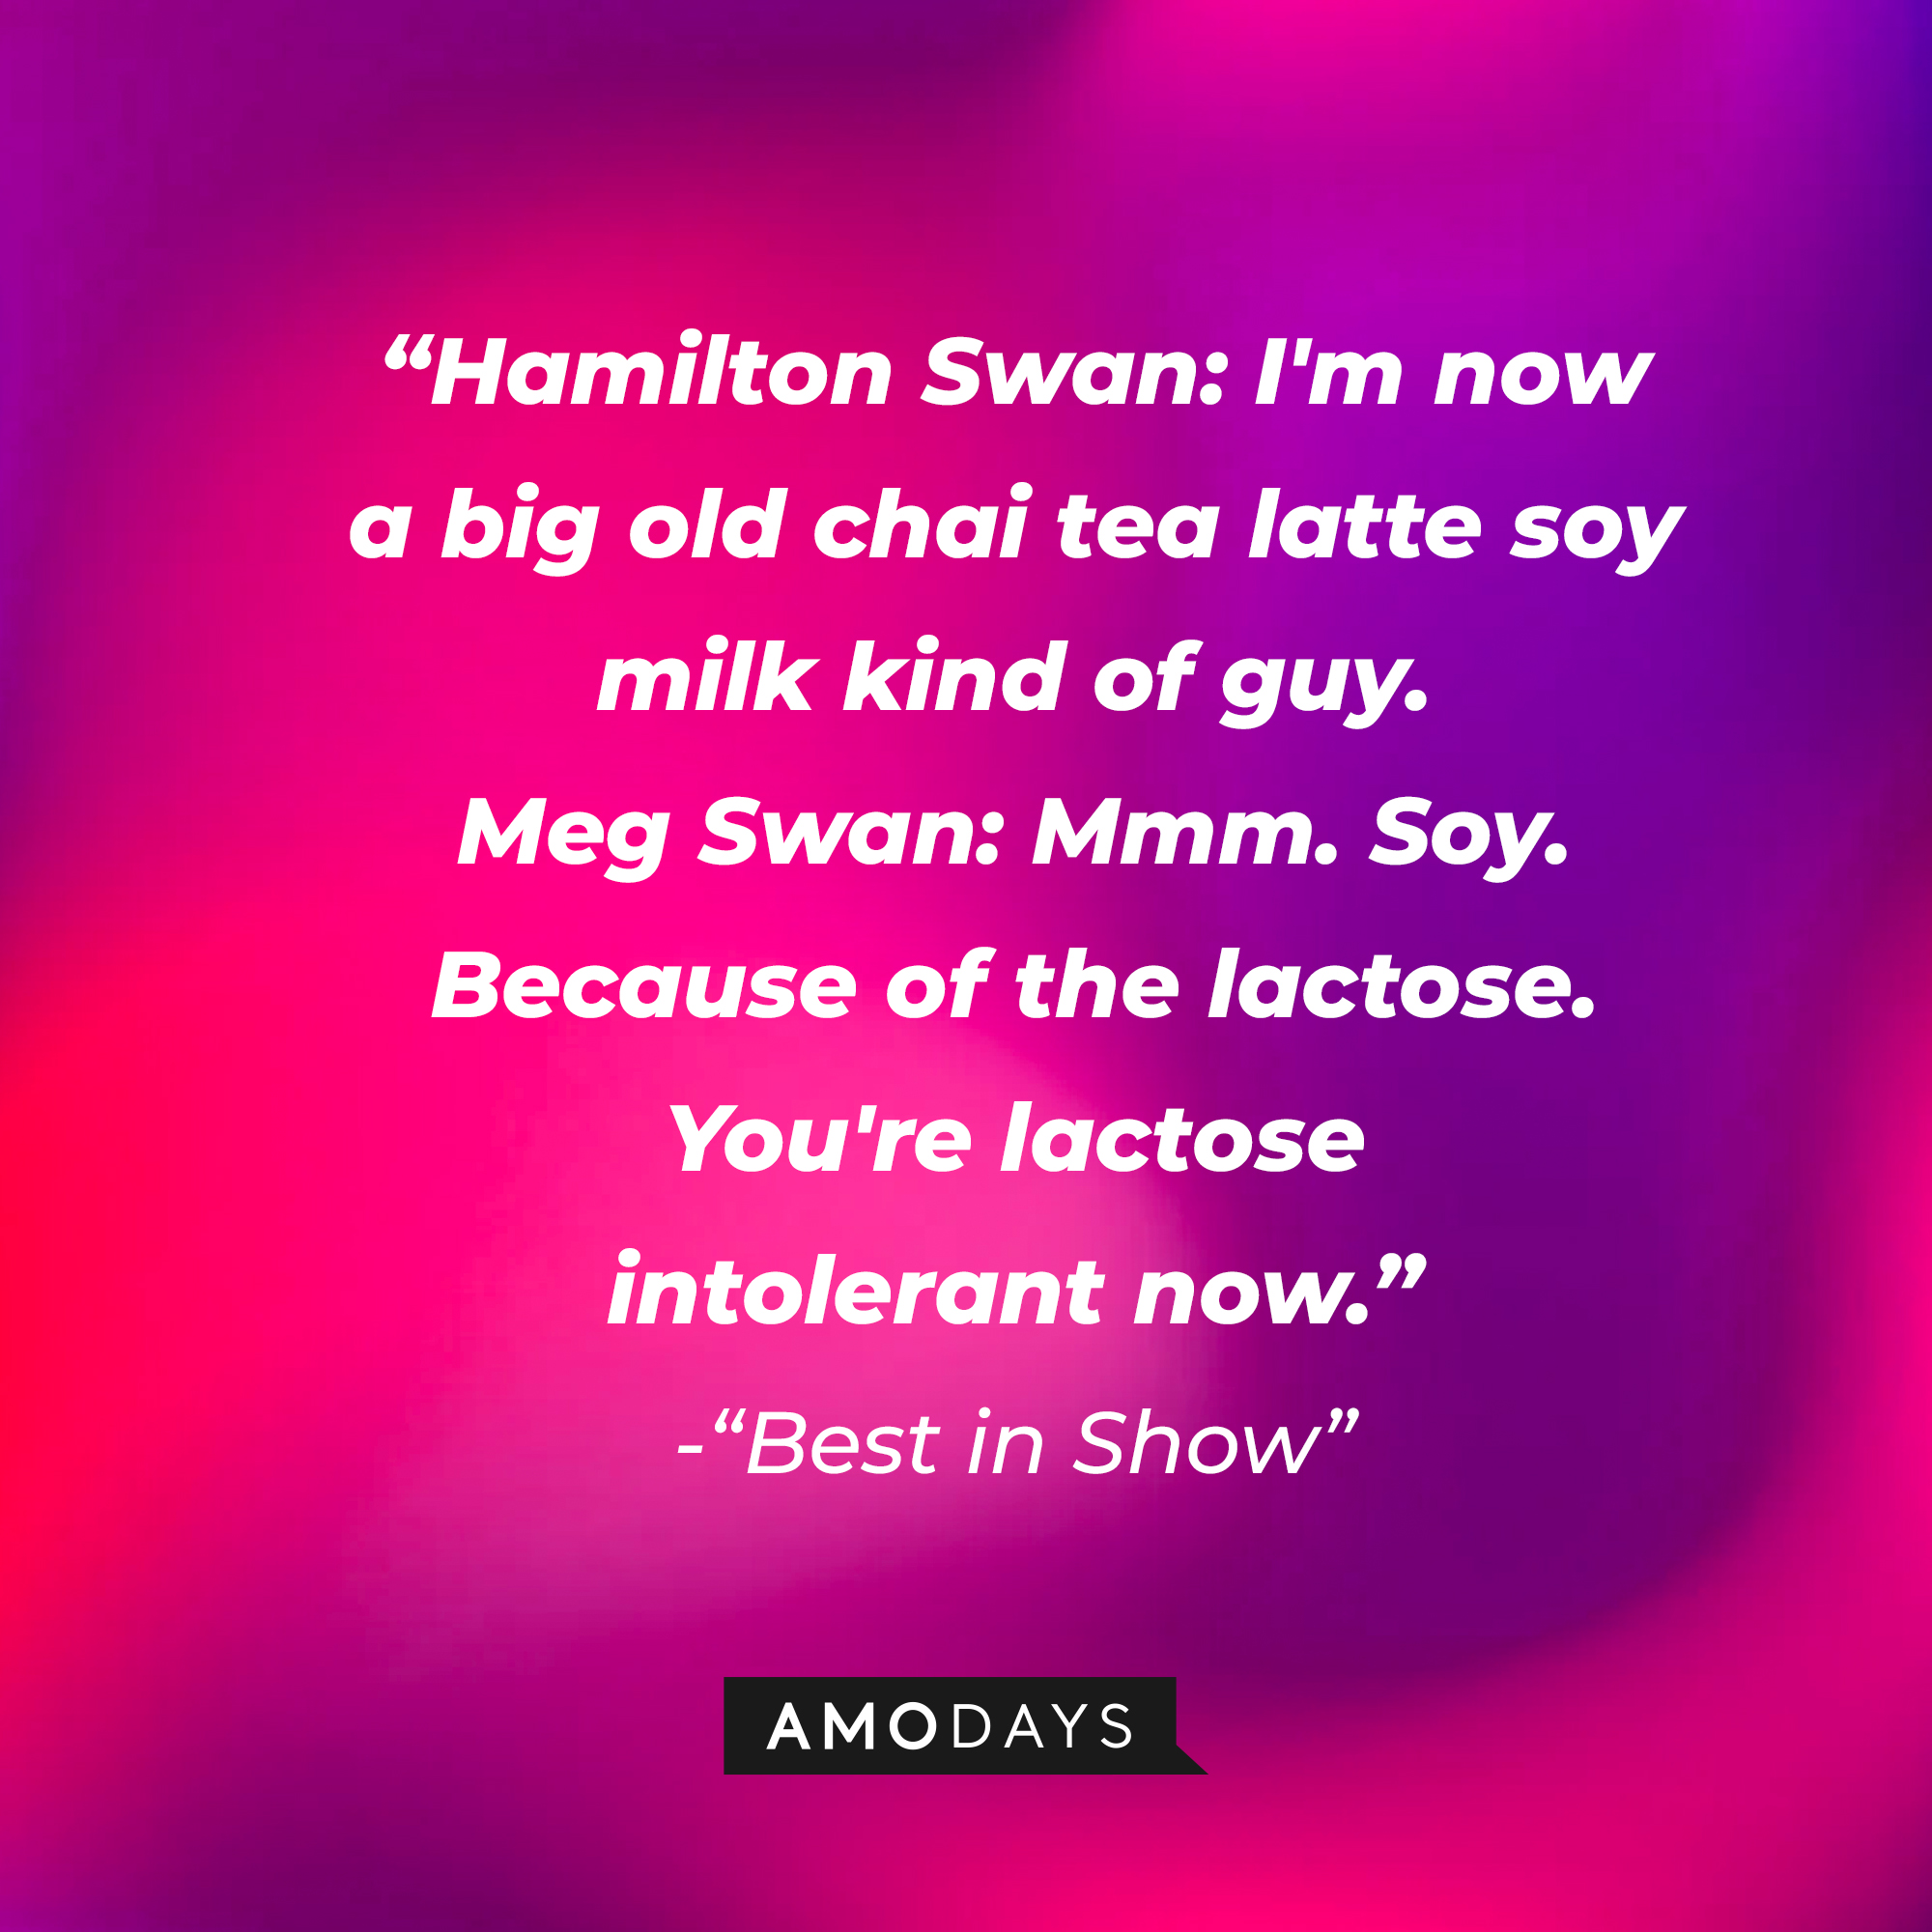 Hamilton and Meg Swan's dialogue in "Best in Show:" "Hamilton Swan: I'm now a big old chai tea latte soy milk kind of guy. Meg Swan: Mmm. Soy. Because of the lactose. You're lactose intolerant now." | Source: AmoDays